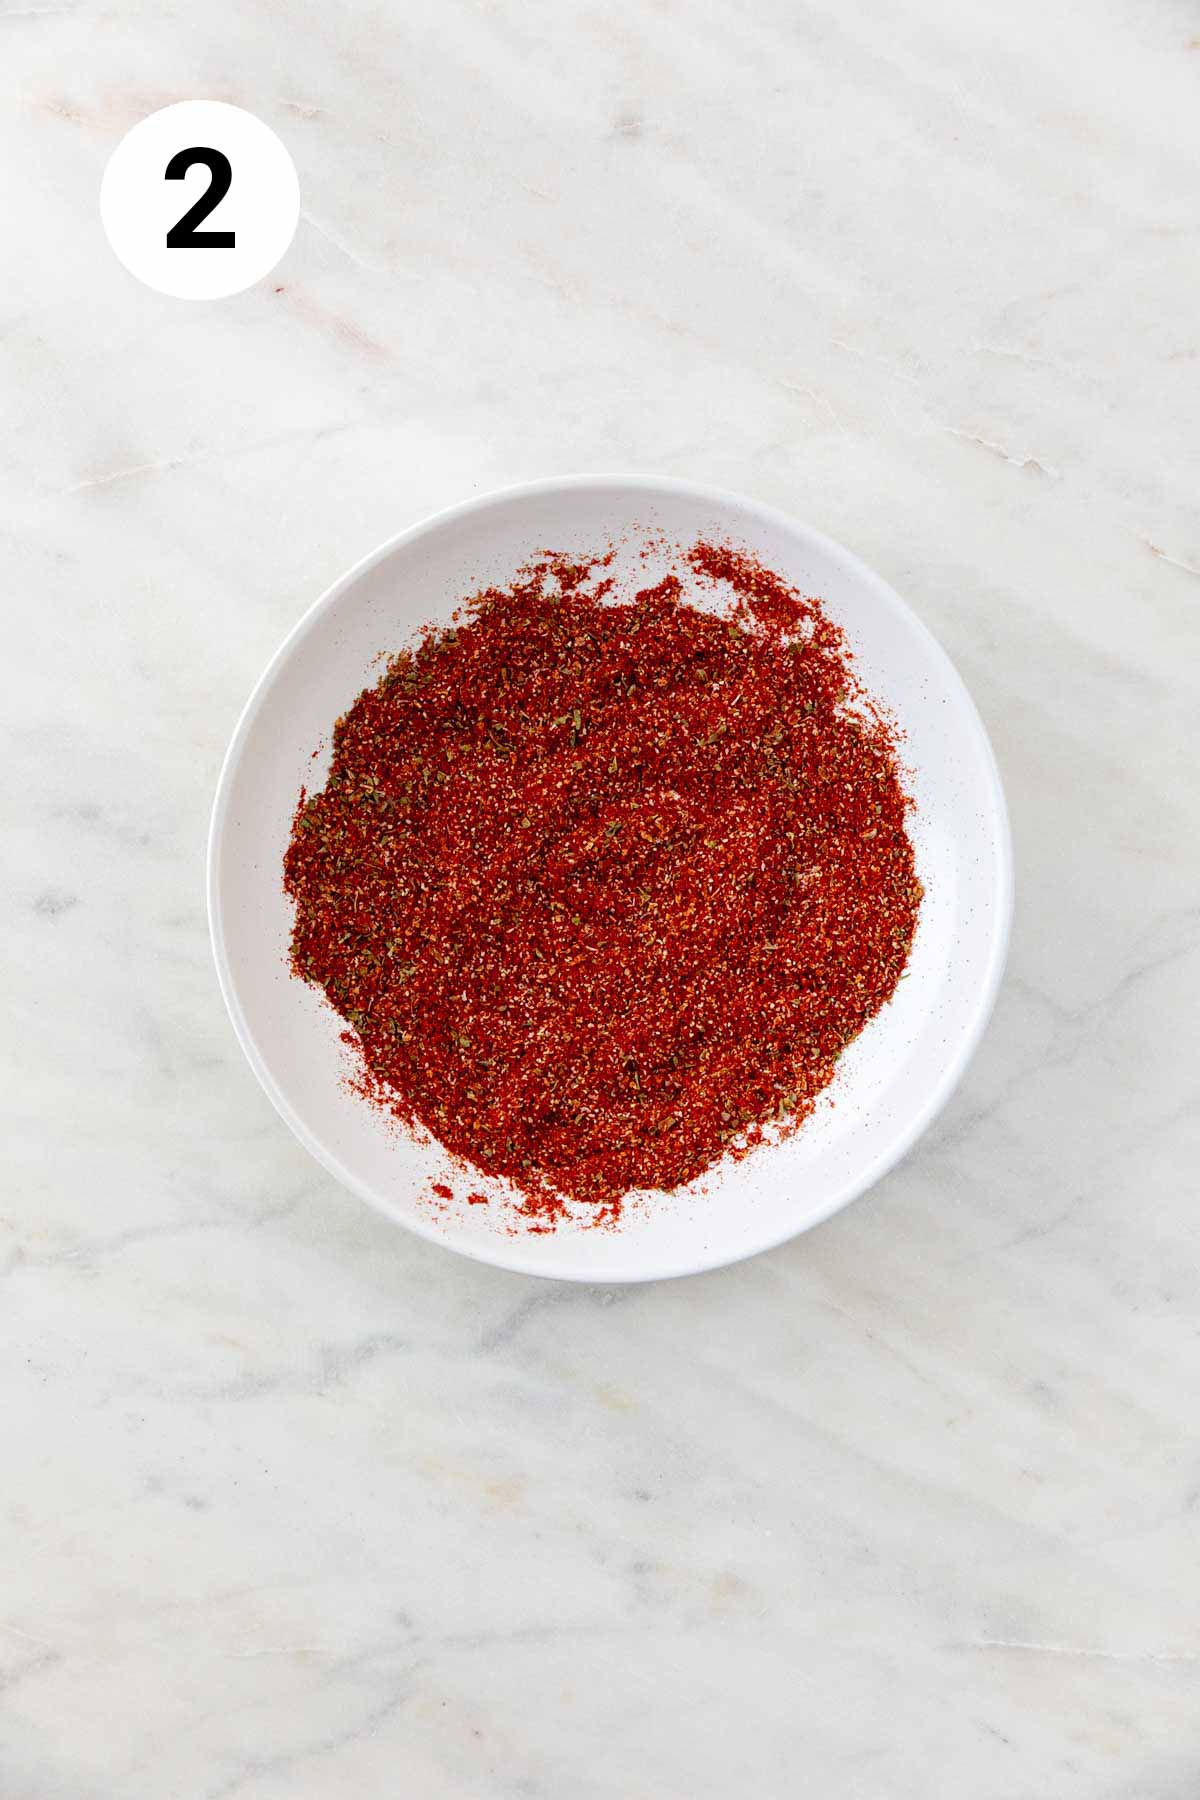 Homemade chili powder in a shallow dish.